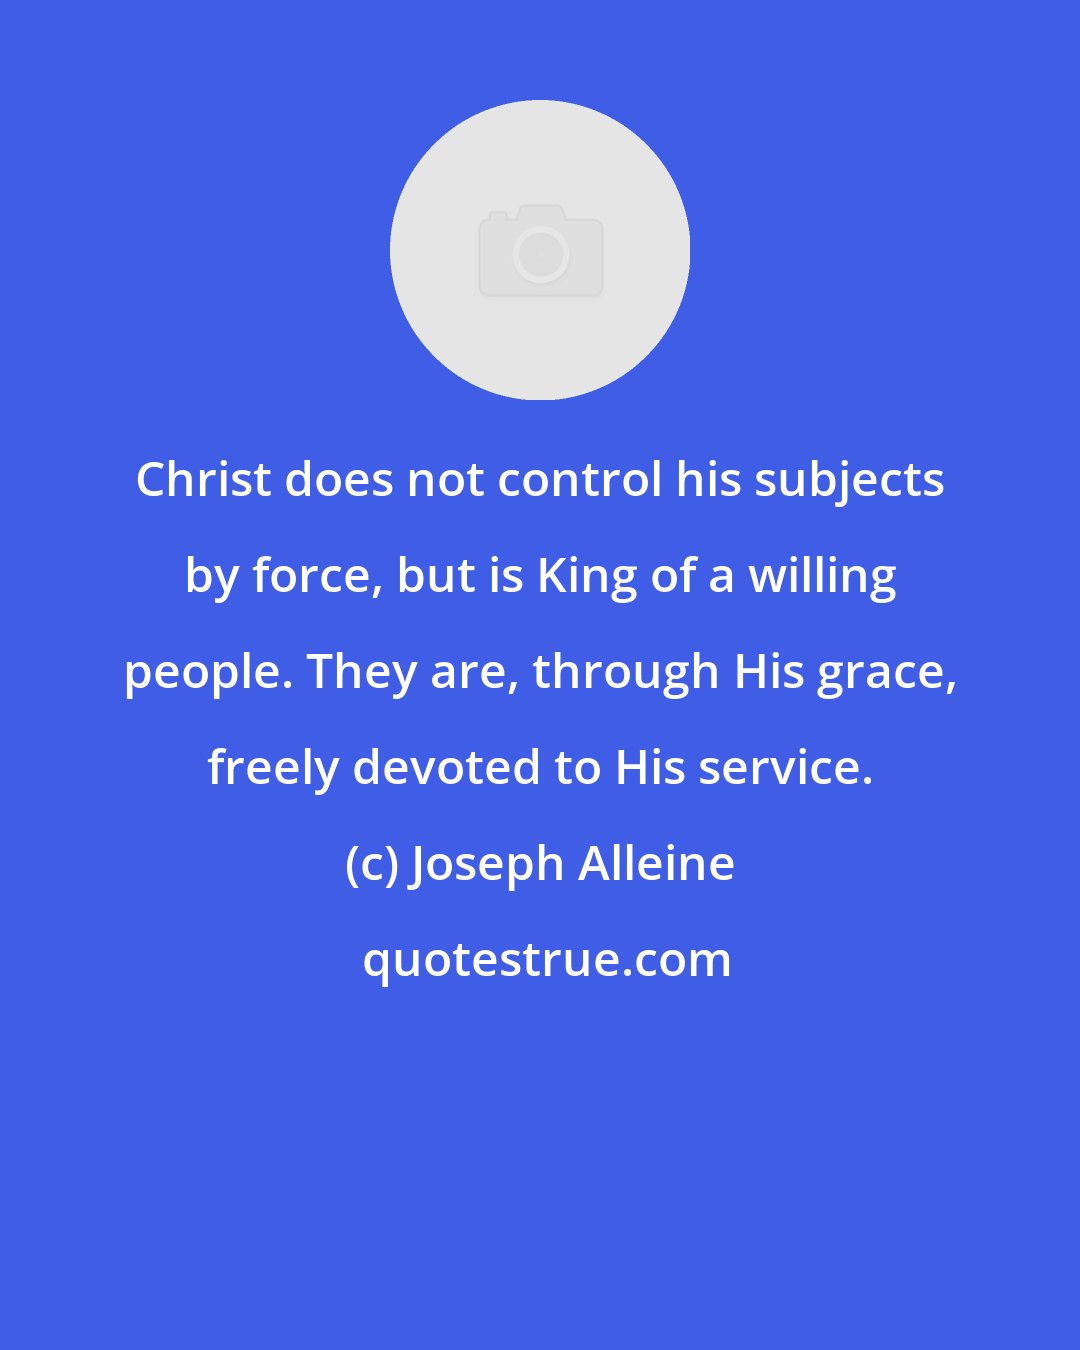 Joseph Alleine: Christ does not control his subjects by force, but is King of a willing people. They are, through His grace, freely devoted to His service.